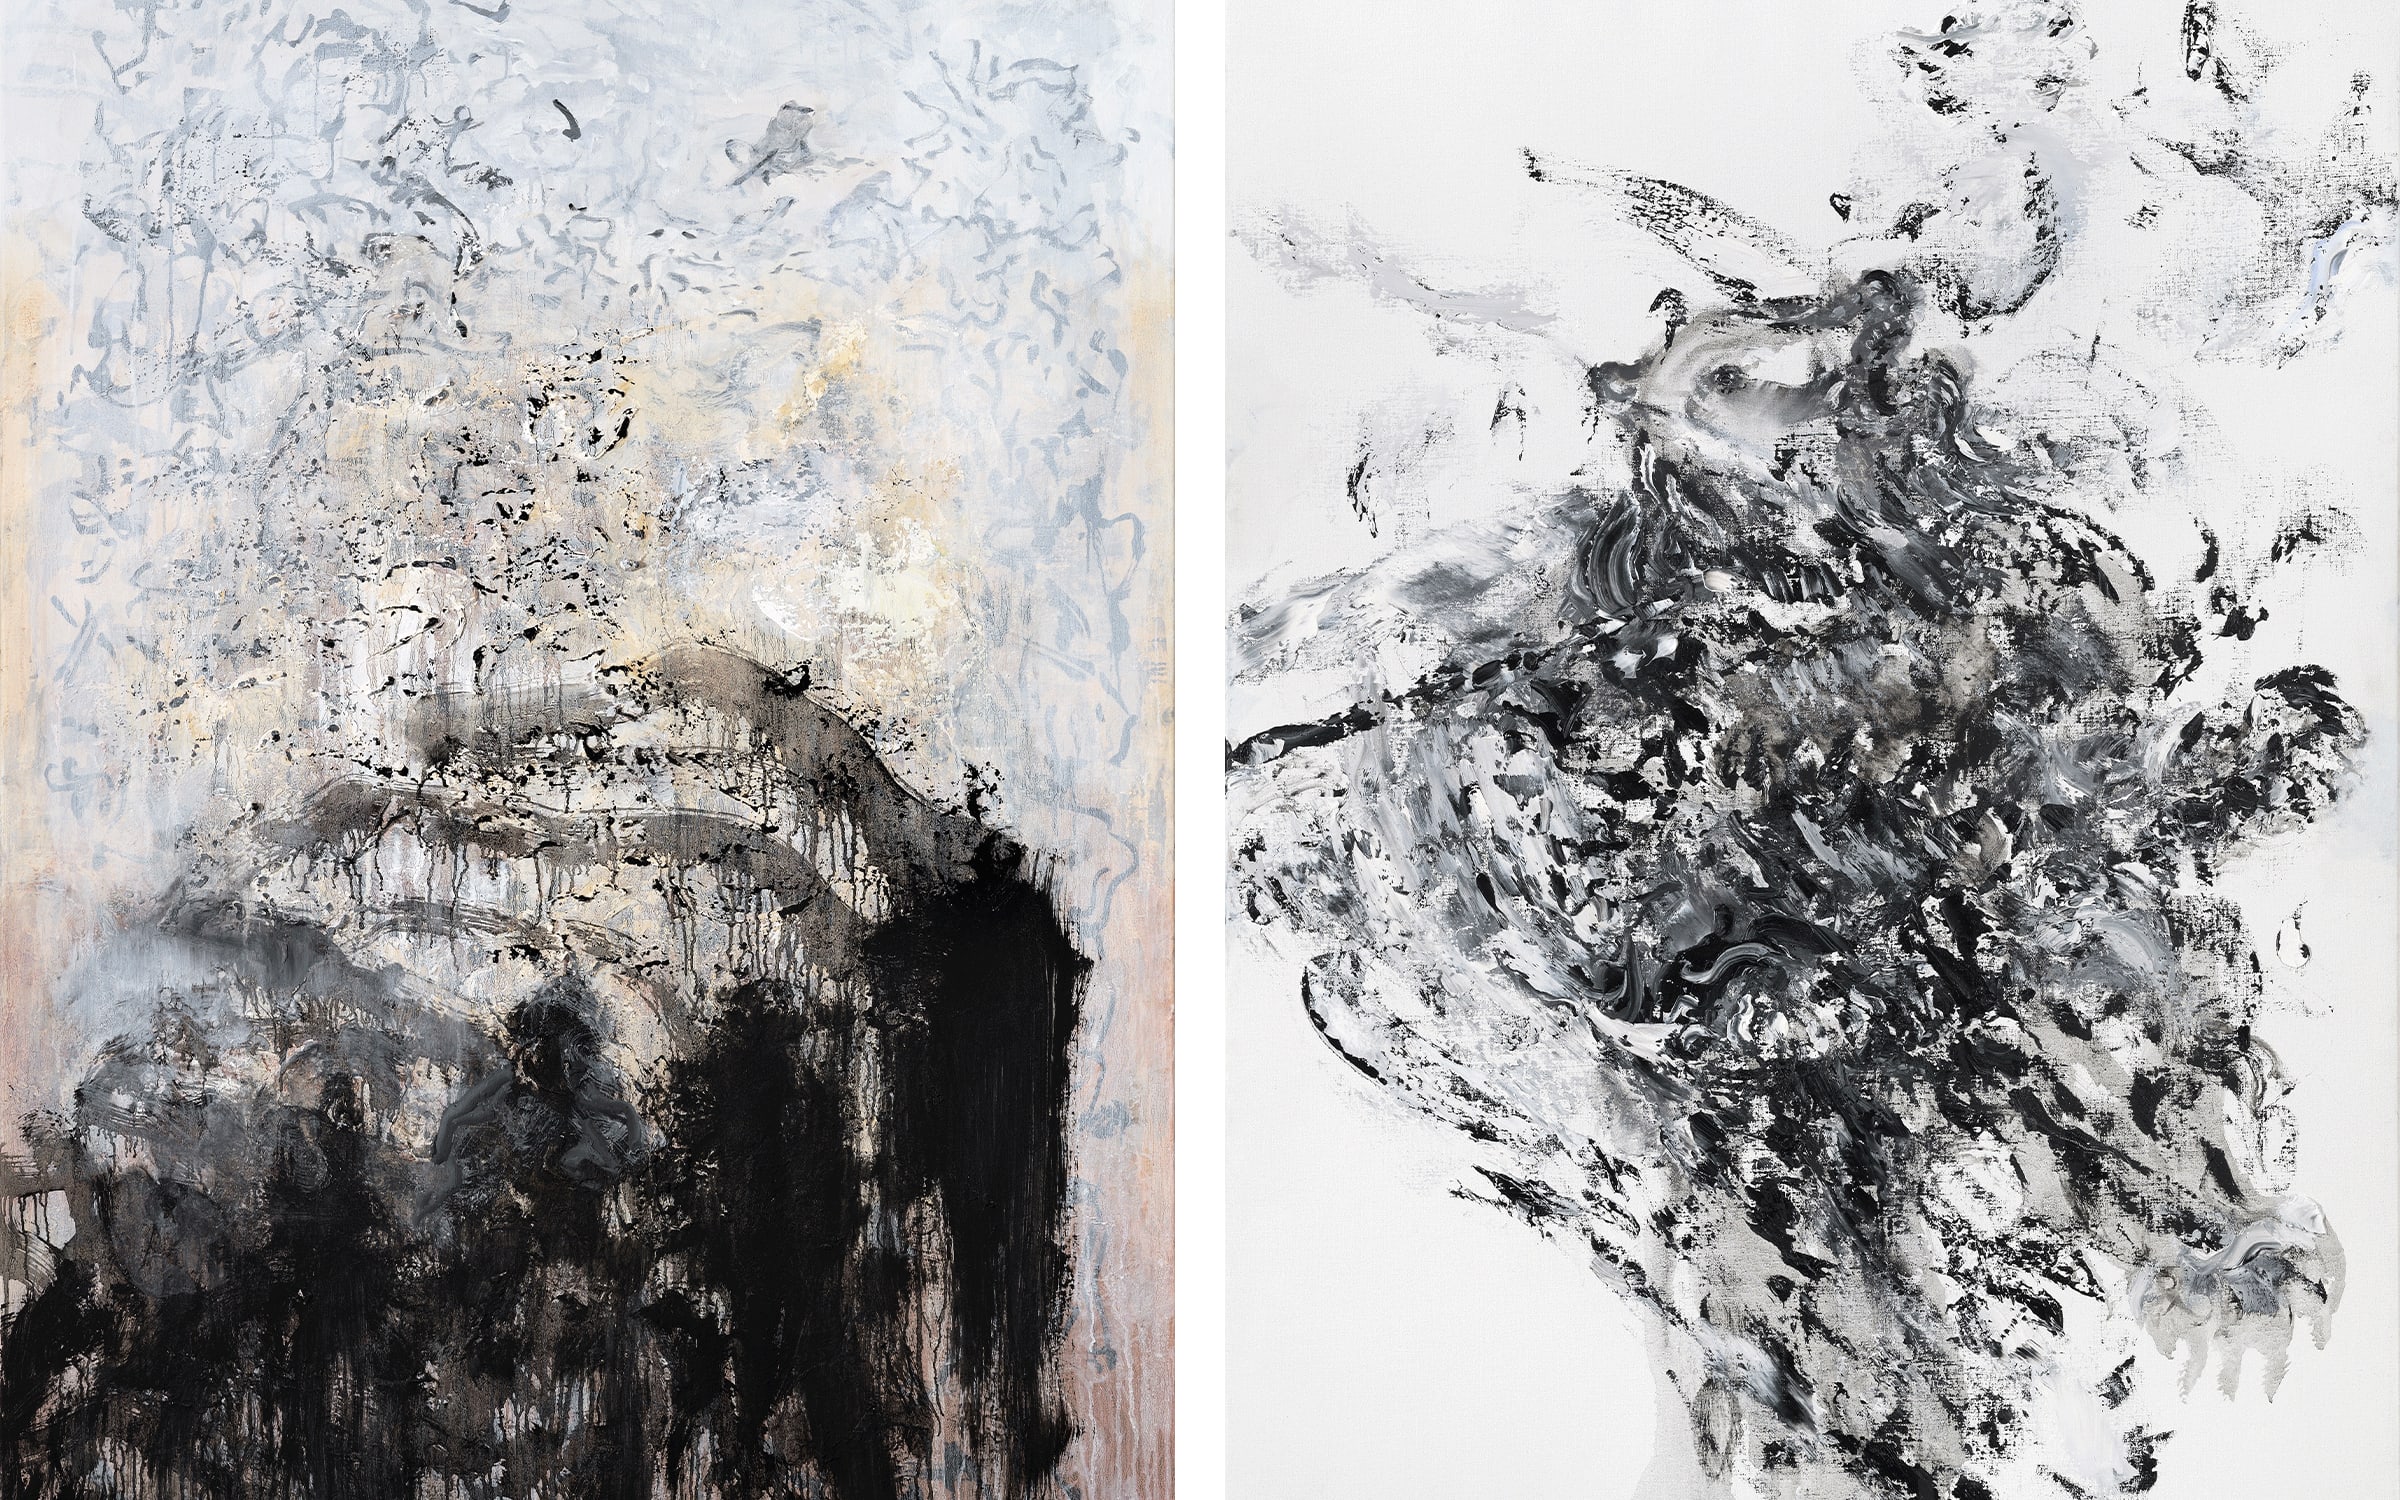 Left: The last baboon, 2018. Right: Dancing Bear, 2020-21. Both paintings by Maggi Hambling, courtesy of the artist and Marlborough Gallery, New York.